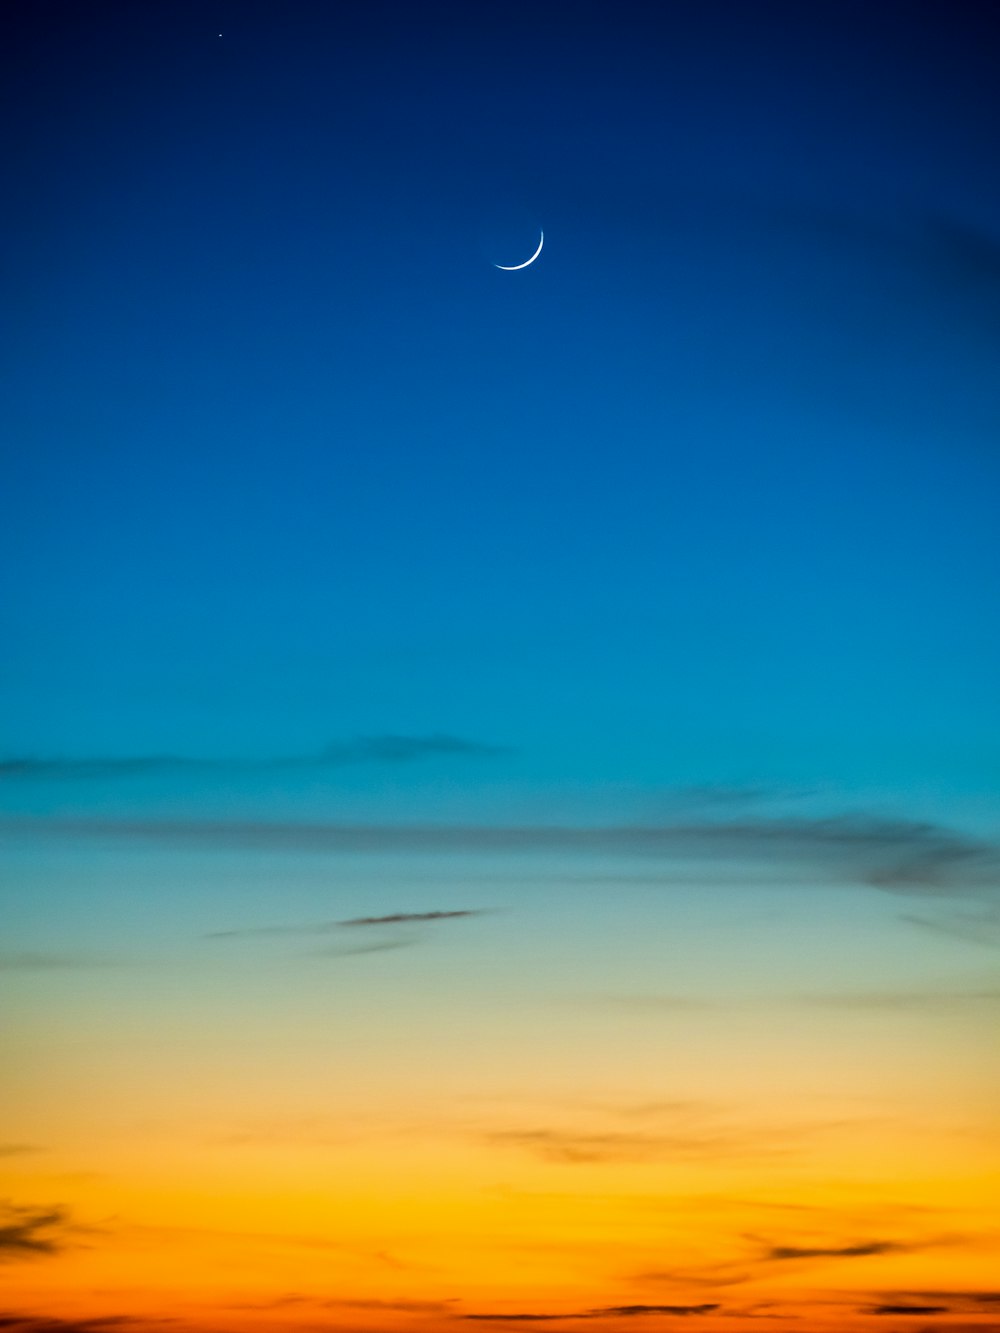 crescent moon and blue sky during golden hour view